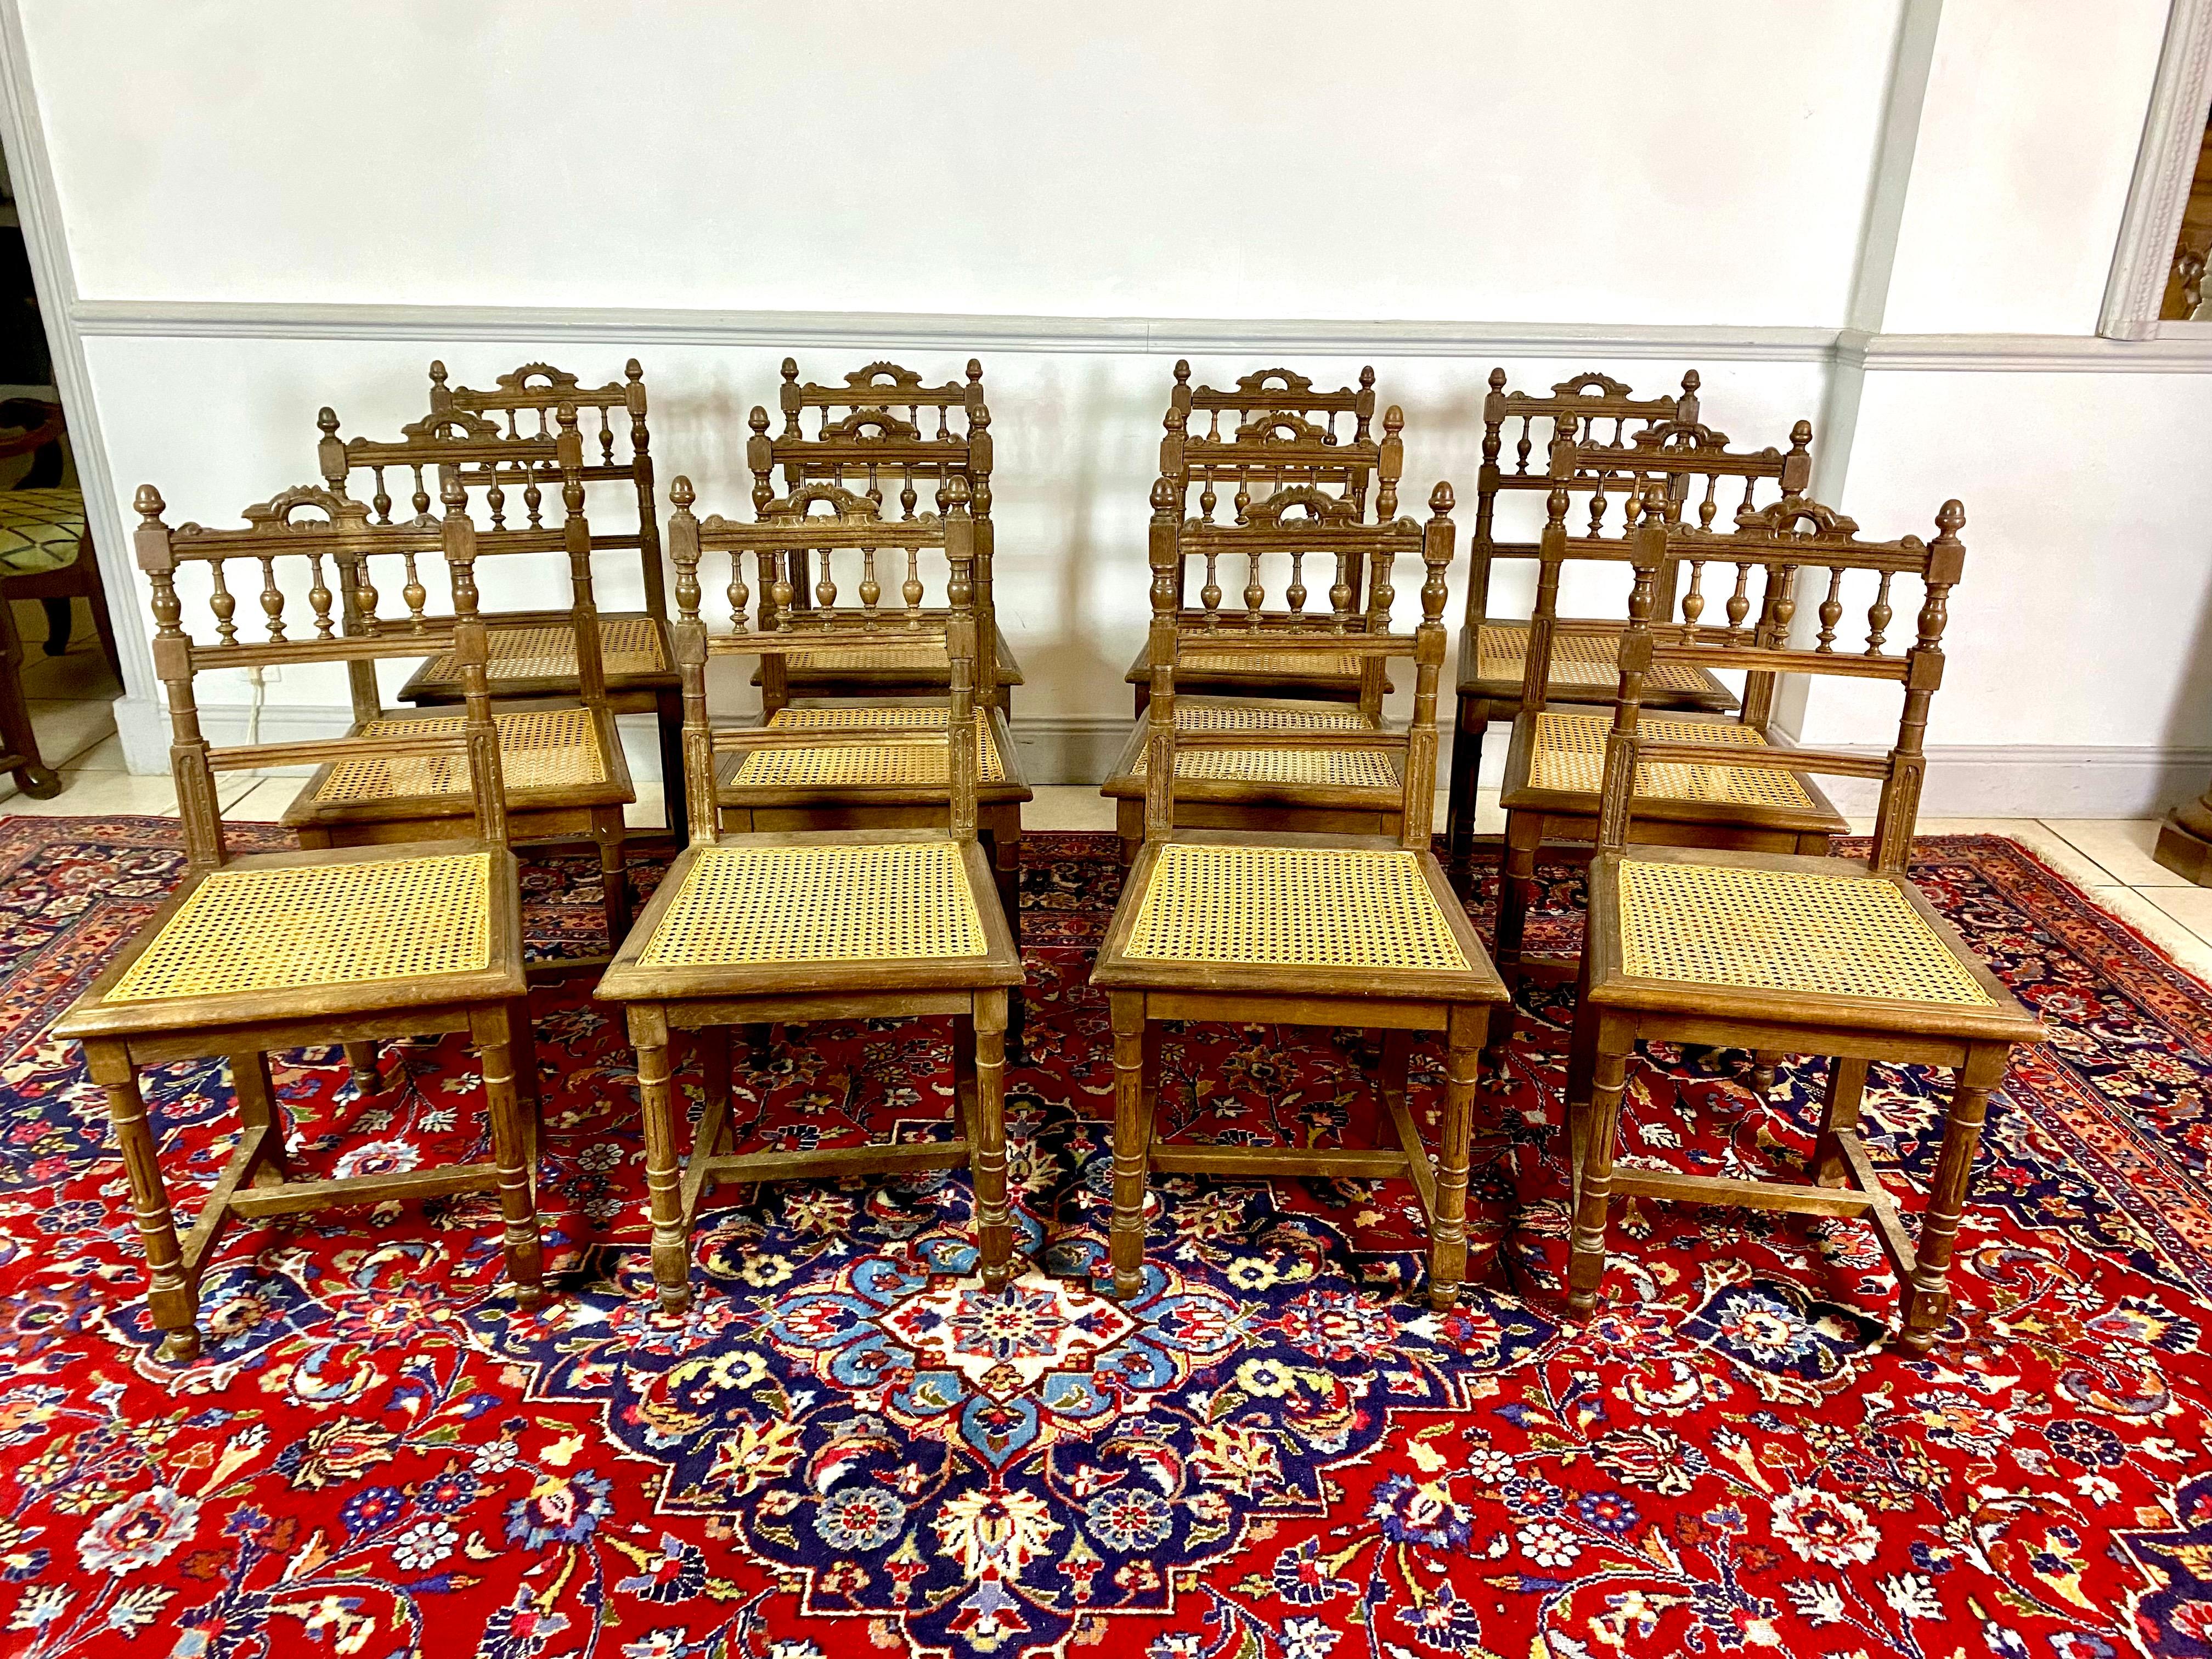 Set of 12 Henri II / Renaissance style caned oak dining room chairs from the Neo-Renaissance period.
The seats are entirely made of cane in good condition, the canage.
The backs of the chairs are richly carved with architectural motifs, mainly